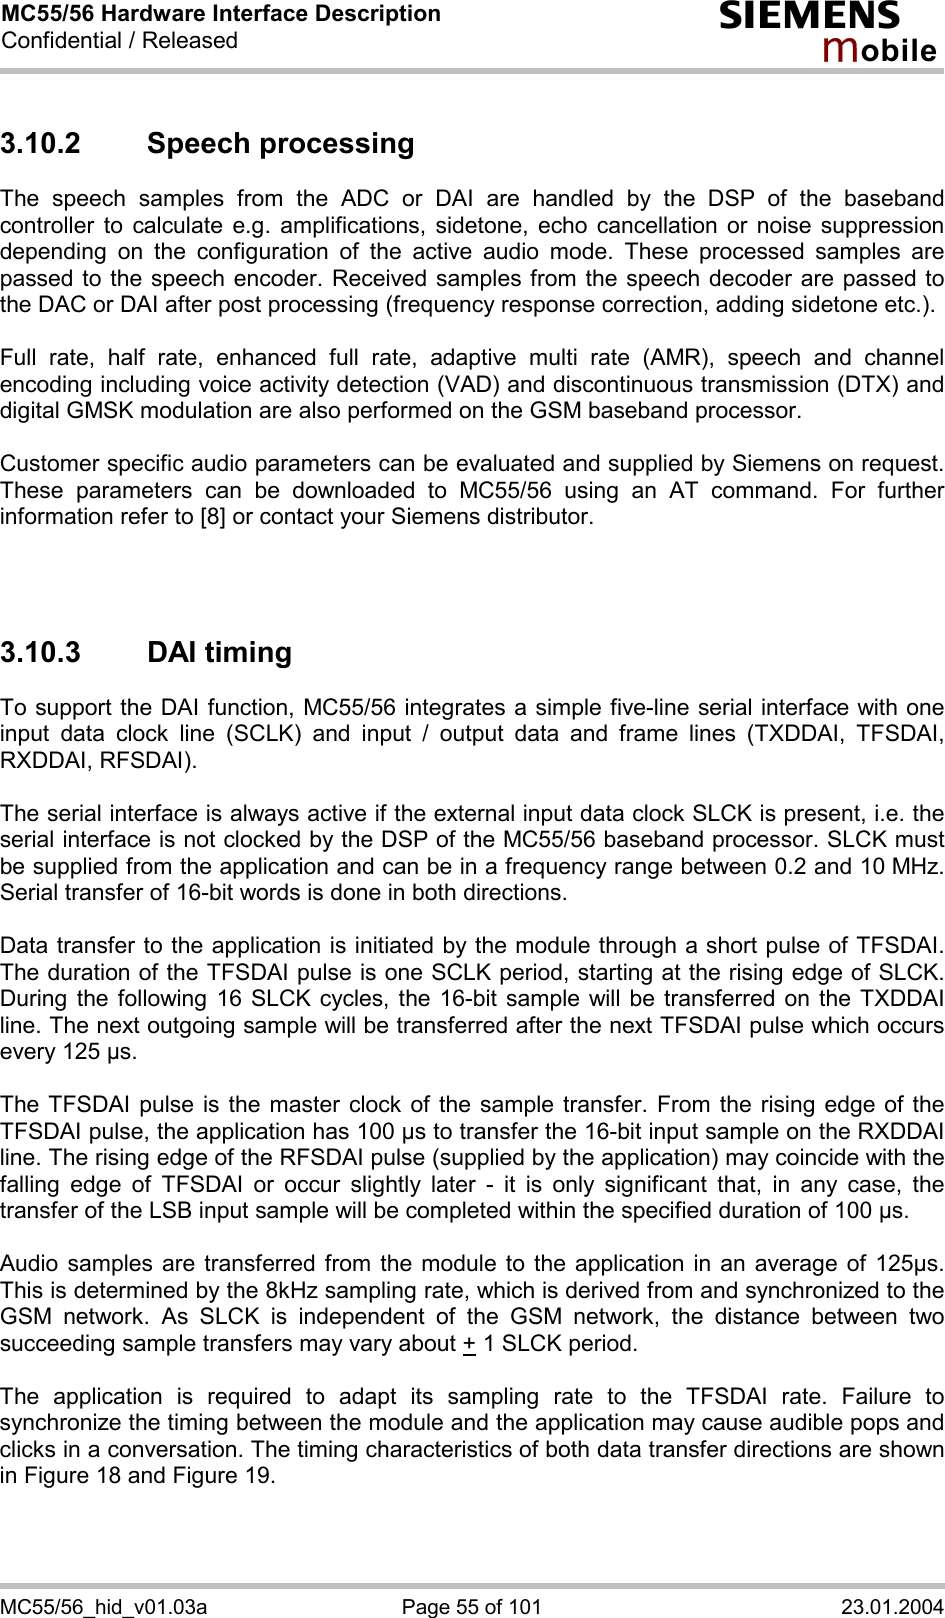 MC55/56 Hardware Interface Description Confidential / Released s mo b i l e MC55/56_hid_v01.03a  Page 55 of 101  23.01.2004 3.10.2 Speech processing The speech samples from the ADC or DAI are handled by the DSP of the baseband controller to calculate e.g. amplifications, sidetone, echo cancellation or noise suppression depending on the configuration of the active audio mode. These processed samples are passed to the speech encoder. Received samples from the speech decoder are passed to the DAC or DAI after post processing (frequency response correction, adding sidetone etc.).  Full rate, half rate, enhanced full rate, adaptive multi rate (AMR), speech and channel encoding including voice activity detection (VAD) and discontinuous transmission (DTX) and digital GMSK modulation are also performed on the GSM baseband processor.  Customer specific audio parameters can be evaluated and supplied by Siemens on request. These parameters can be downloaded to MC55/56 using an AT command. For further information refer to [8] or contact your Siemens distributor.    3.10.3 DAI timing To support the DAI function, MC55/56 integrates a simple five-line serial interface with one input data clock line (SCLK) and input / output data and frame lines (TXDDAI, TFSDAI, RXDDAI, RFSDAI).   The serial interface is always active if the external input data clock SLCK is present, i.e. the serial interface is not clocked by the DSP of the MC55/56 baseband processor. SLCK must be supplied from the application and can be in a frequency range between 0.2 and 10 MHz. Serial transfer of 16-bit words is done in both directions.   Data transfer to the application is initiated by the module through a short pulse of TFSDAI. The duration of the TFSDAI pulse is one SCLK period, starting at the rising edge of SLCK. During the following 16 SLCK cycles, the 16-bit sample will be transferred on the TXDDAI line. The next outgoing sample will be transferred after the next TFSDAI pulse which occurs every 125 µs.   The TFSDAI pulse is the master clock of the sample transfer. From the rising edge of the TFSDAI pulse, the application has 100 µs to transfer the 16-bit input sample on the RXDDAI line. The rising edge of the RFSDAI pulse (supplied by the application) may coincide with the falling edge of TFSDAI or occur slightly later - it is only significant that, in any case, the transfer of the LSB input sample will be completed within the specified duration of 100 µs.   Audio samples are transferred from the module to the application in an average of 125µs. This is determined by the 8kHz sampling rate, which is derived from and synchronized to the GSM network. As SLCK is independent of the GSM network, the distance between two succeeding sample transfers may vary about + 1 SLCK period.  The application is required to adapt its sampling rate to the TFSDAI rate. Failure to synchronize the timing between the module and the application may cause audible pops and clicks in a conversation. The timing characteristics of both data transfer directions are shown in Figure 18 and Figure 19.  